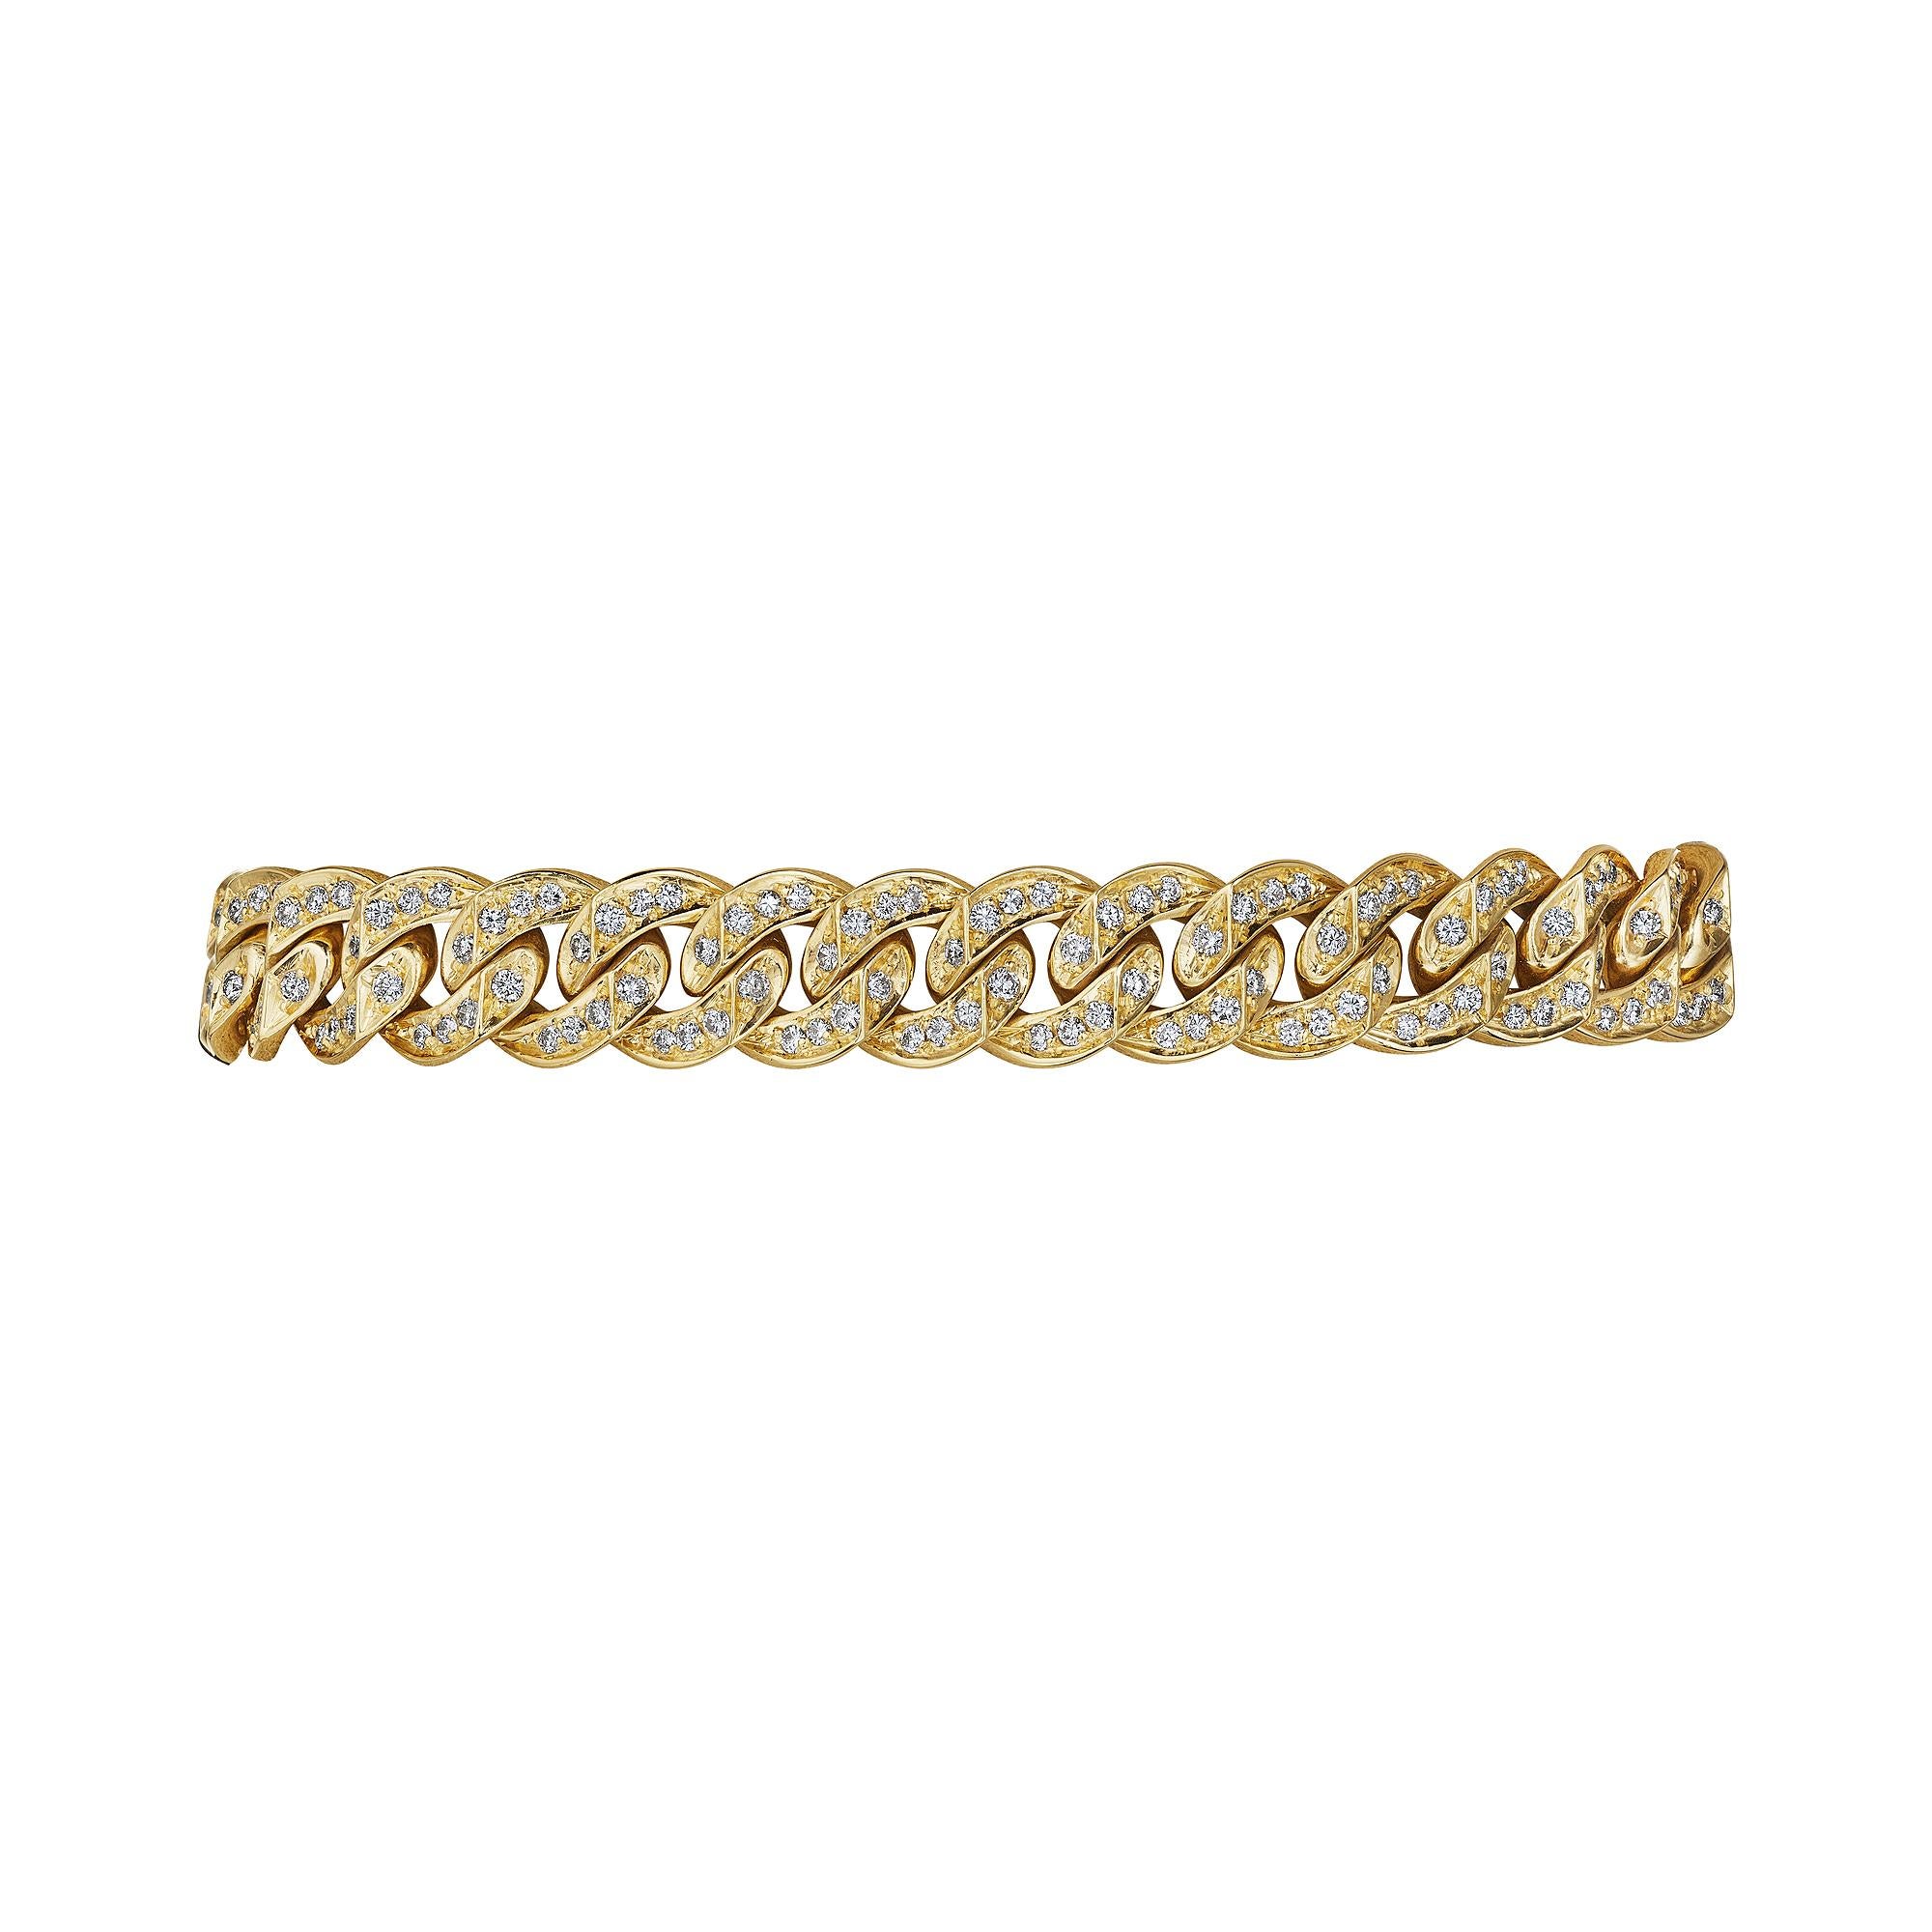 You won't be able to 'curb' your enthusiasm with this Bulgari vintage diamond 18 karat yellow gold curb link bracelet that can be worn 24/7.  With 30 curb links, set with 3.65 total carats of diamonds, this perfectly proportioned bracelet is the one